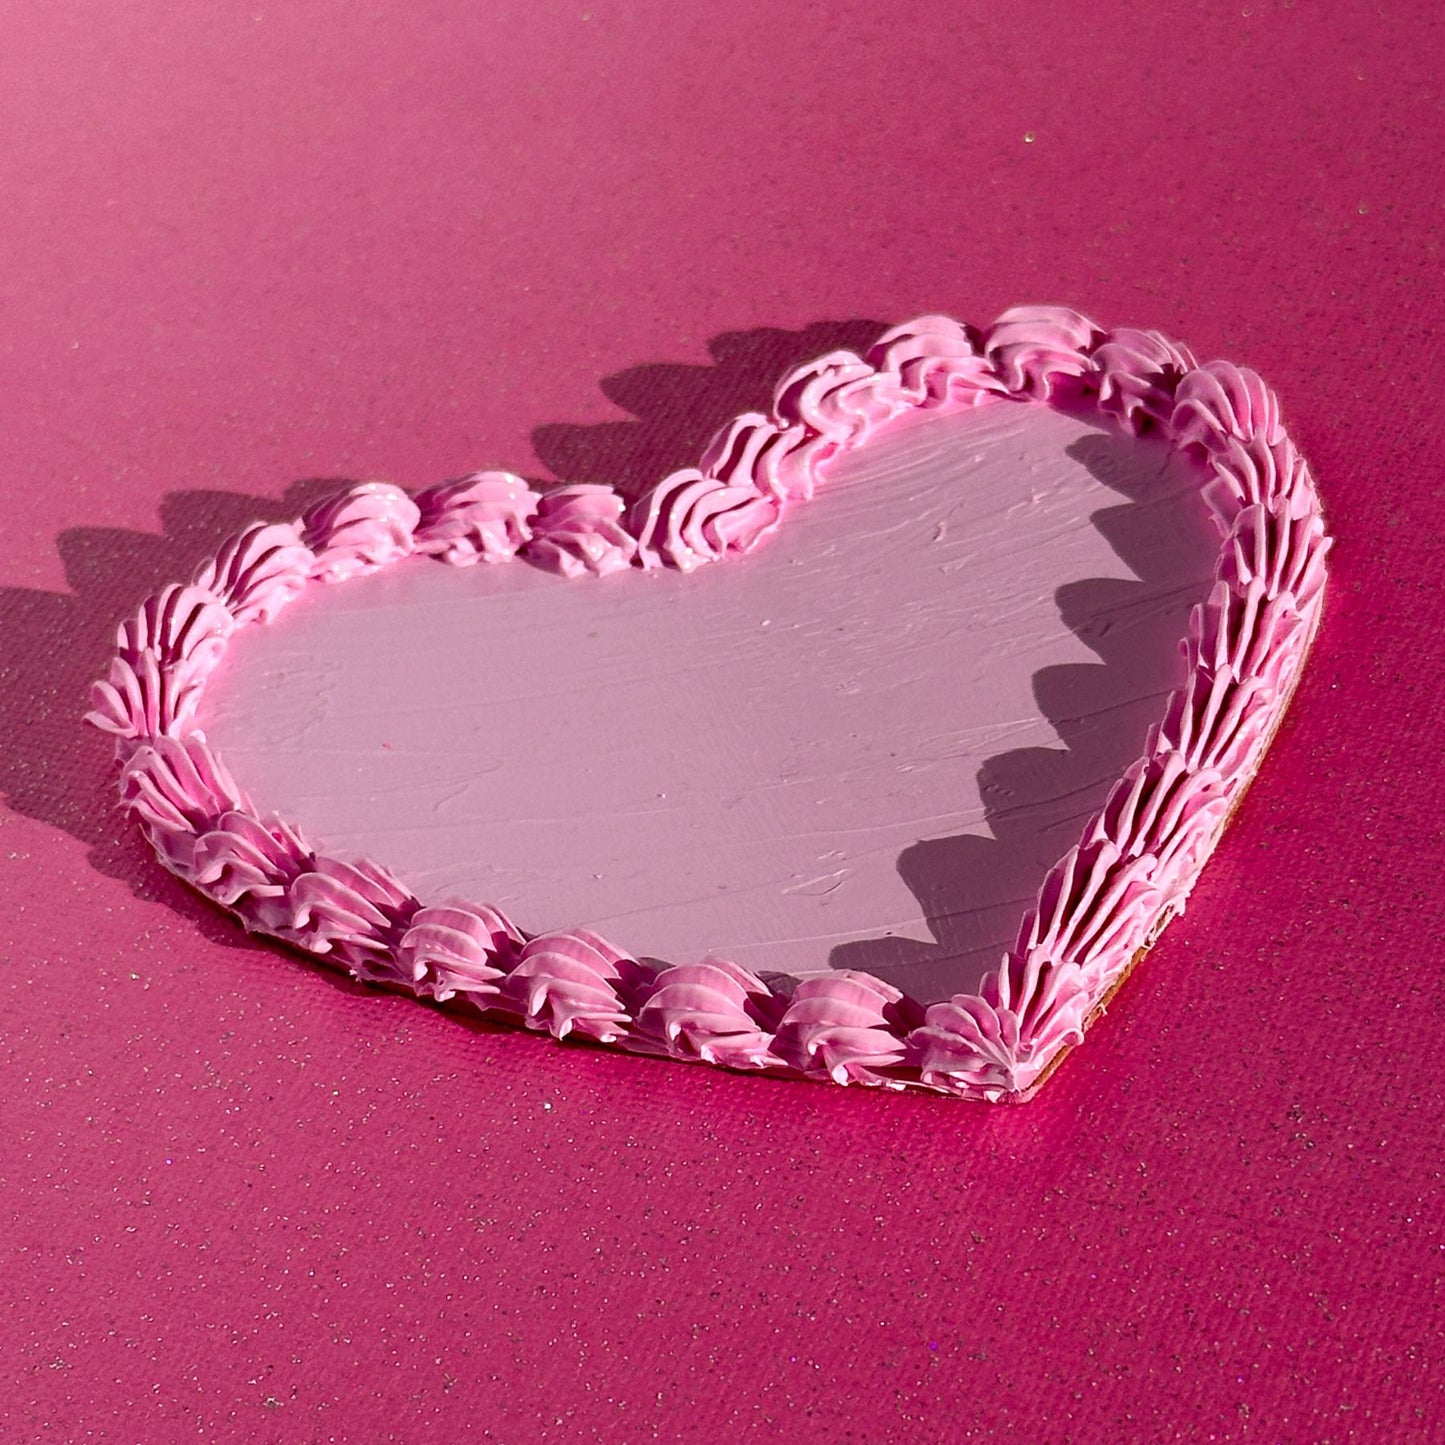 3D Painted Cookie - Heart With Pink "Frosting"